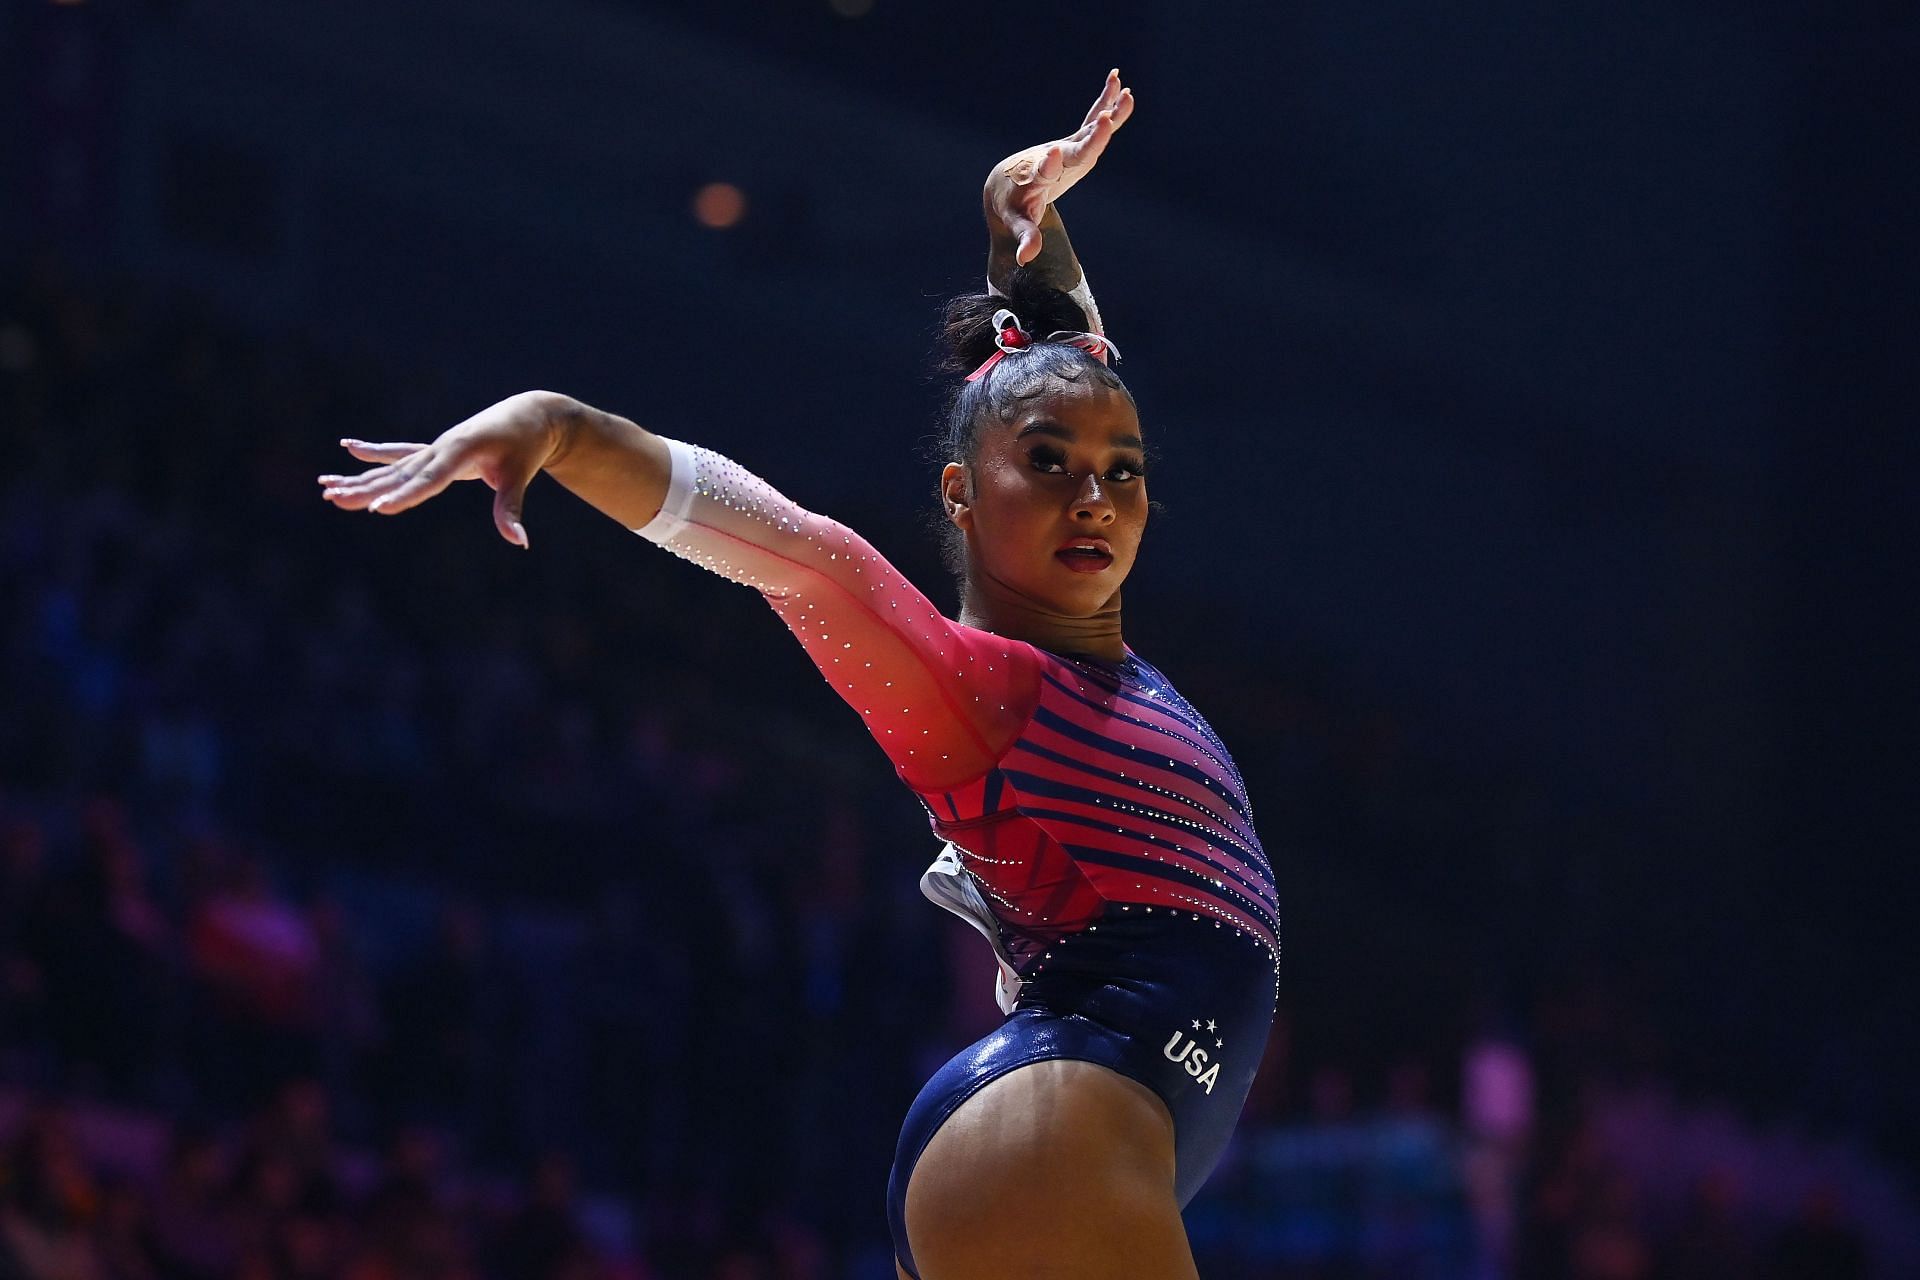 Jordan Chiles in the Woman&#039;s Floor Final at the 2022 Gymnastics World Championships. (Photo by Laurence Griffiths/Getty Images)